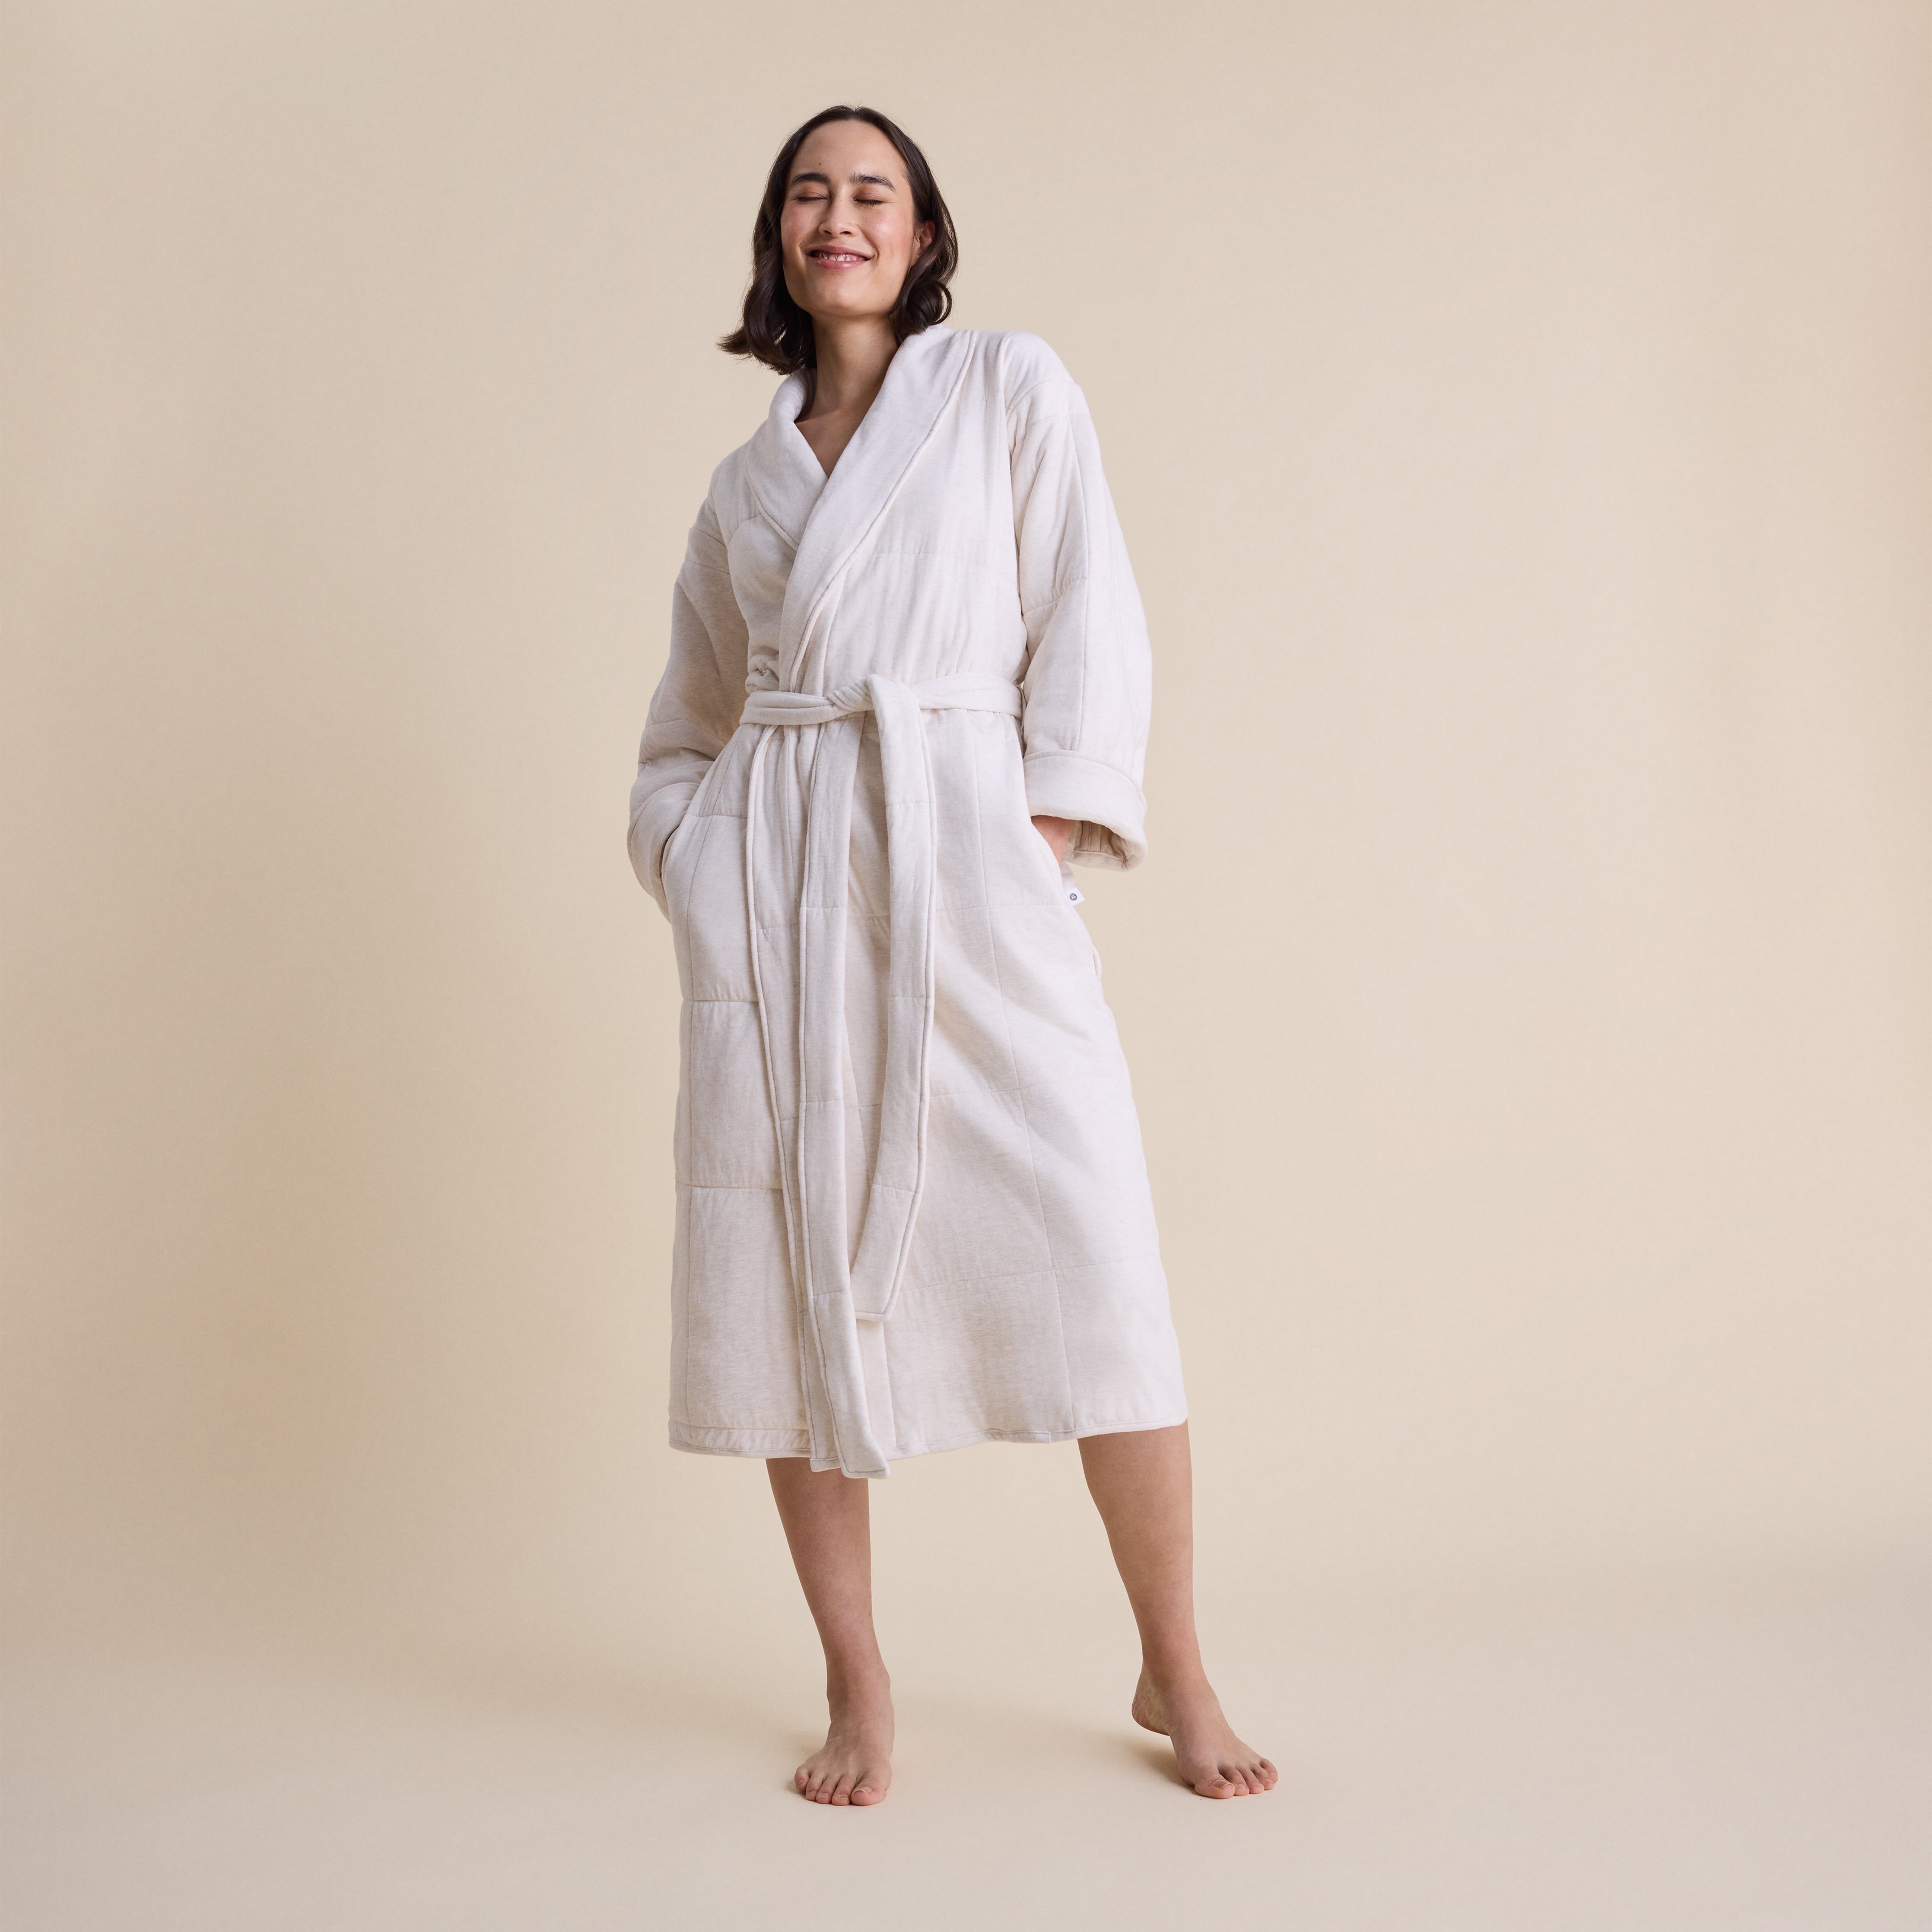 Bath Robes, Sleep Robes, Cotton Robes, Dressing Gown